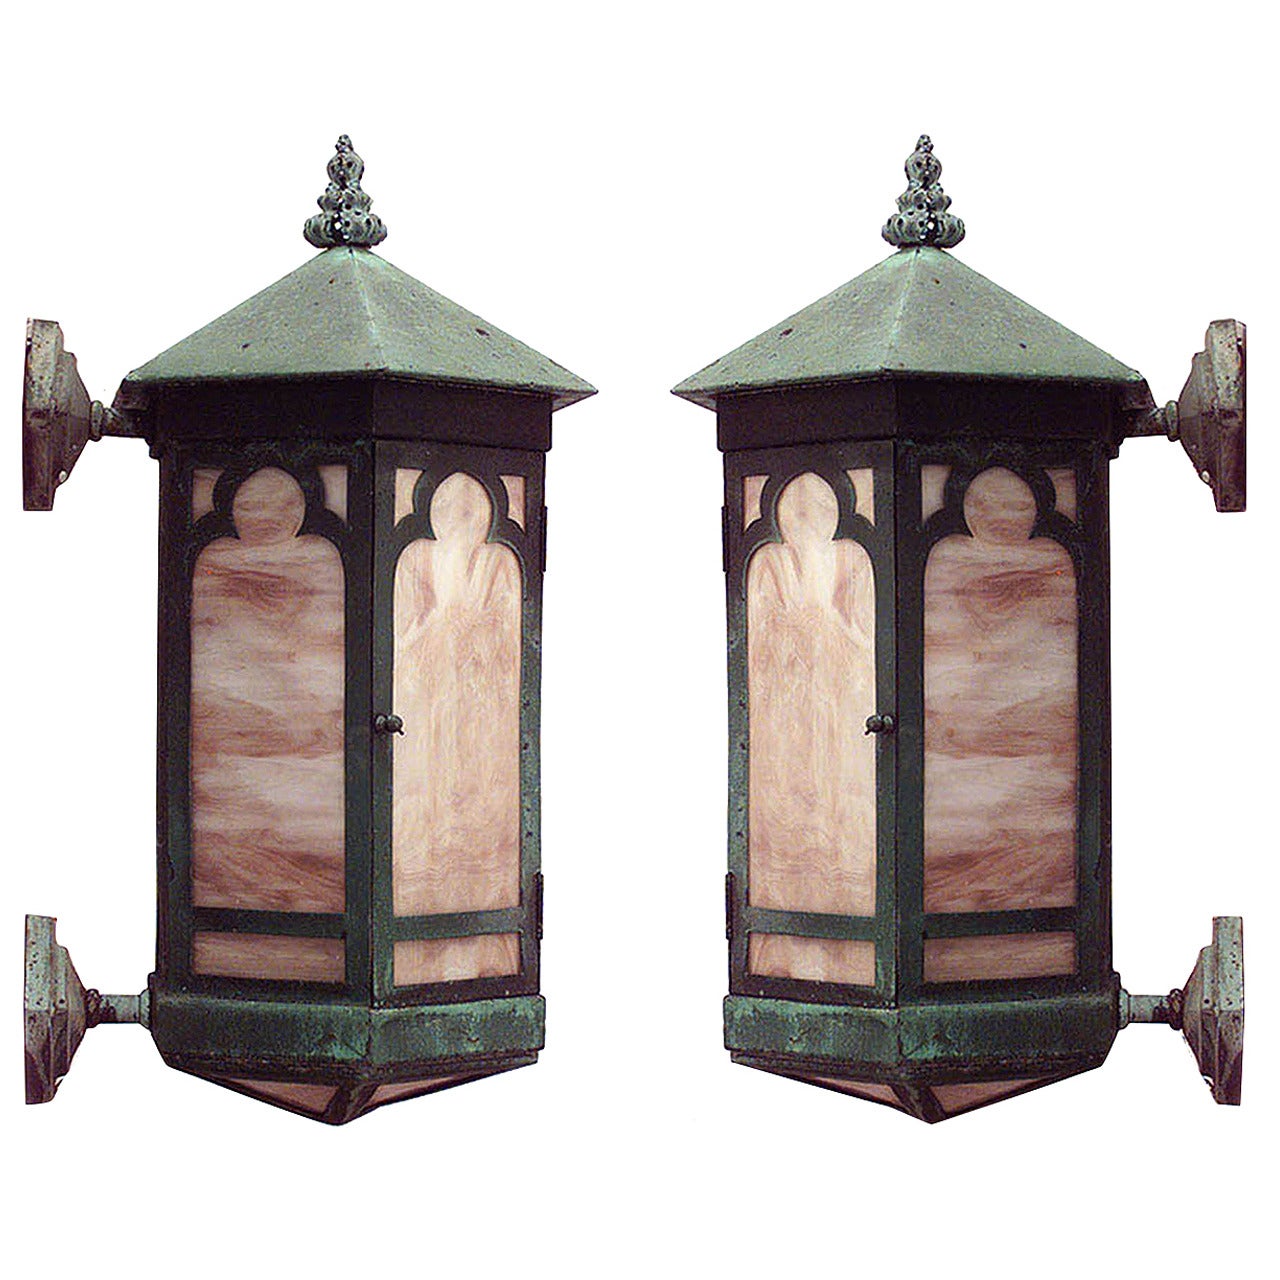 Pair of 19th Century American Copper and Pigmented Opaque Glass Lanterns